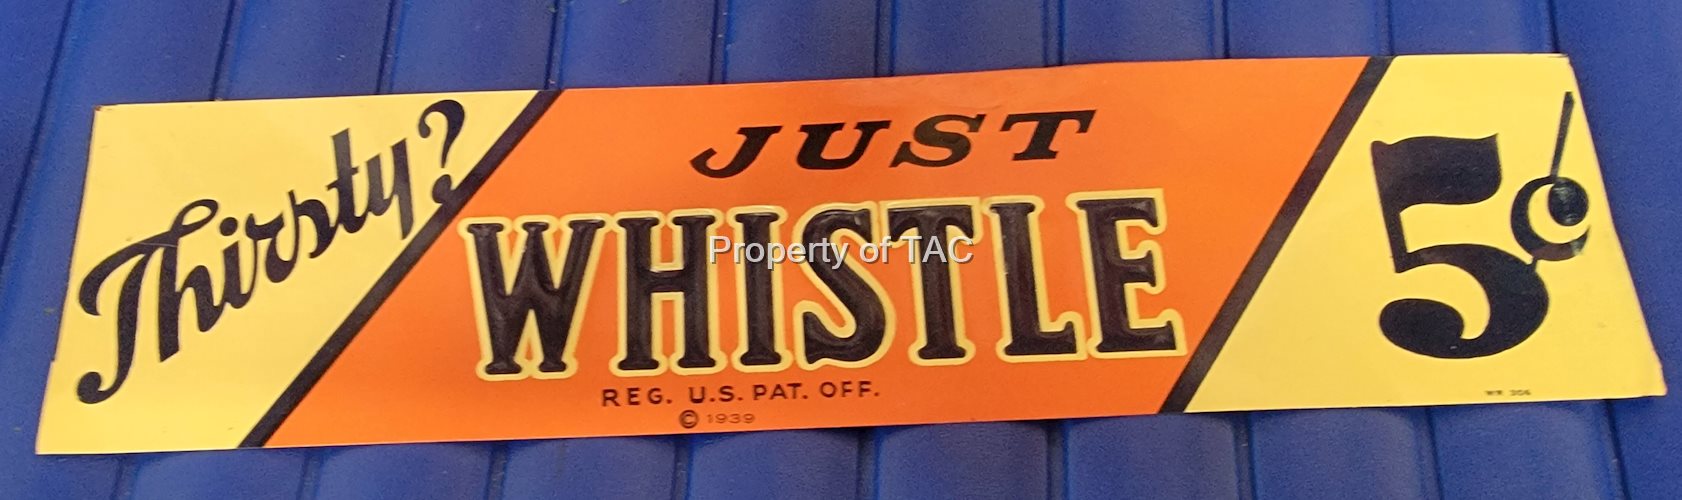 Thirsty? Just Whistle 5 ¢ Metal Sign